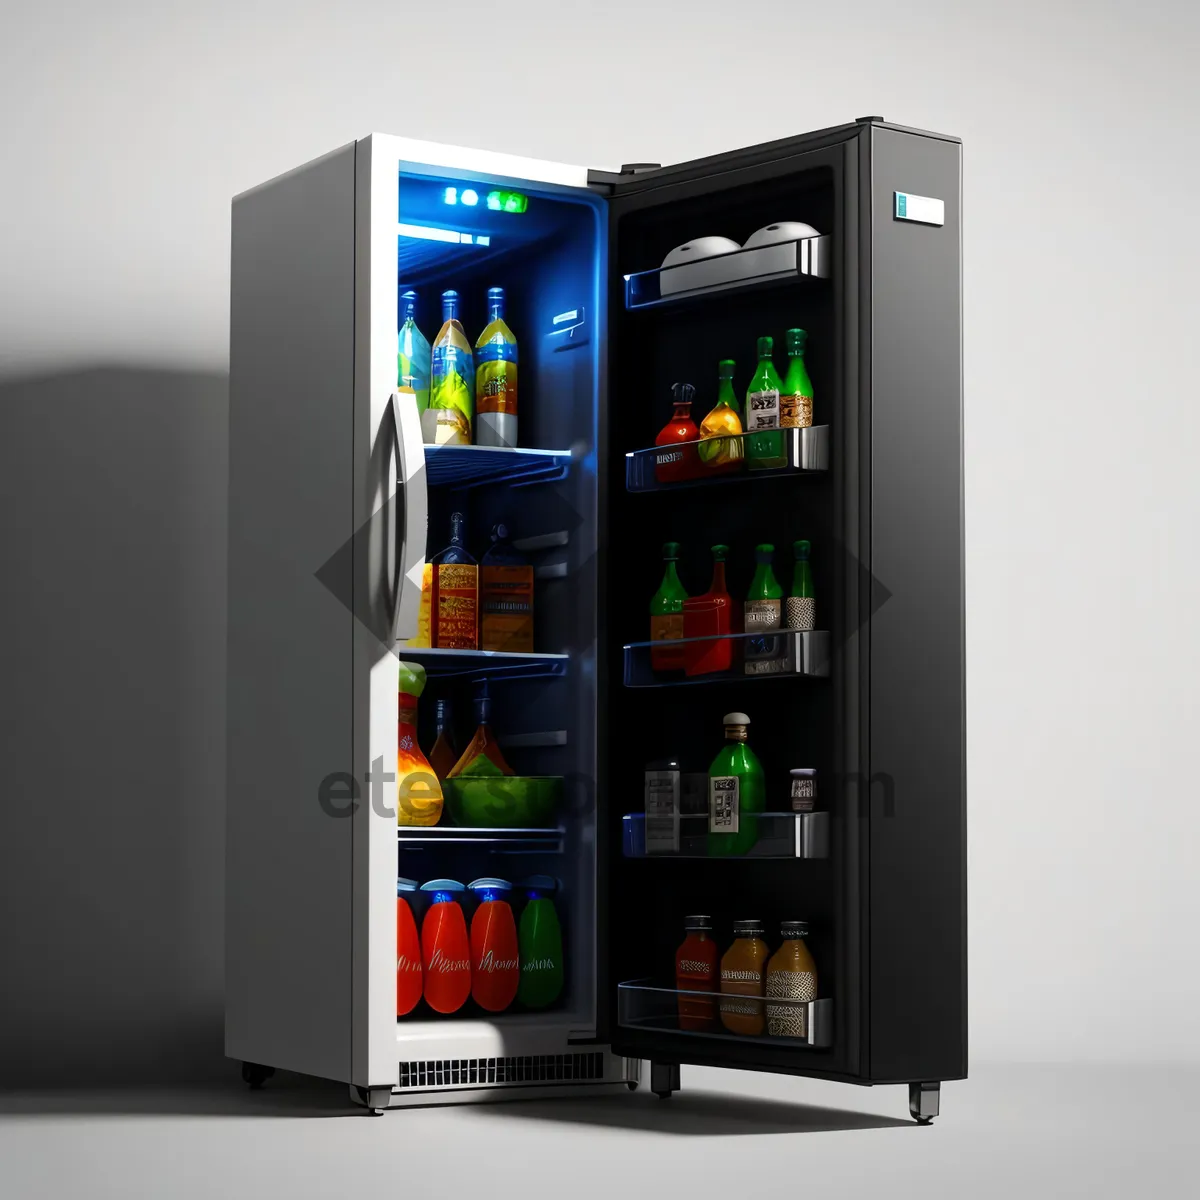 Picture of Modern Vending Machine with Cooling System and Screen